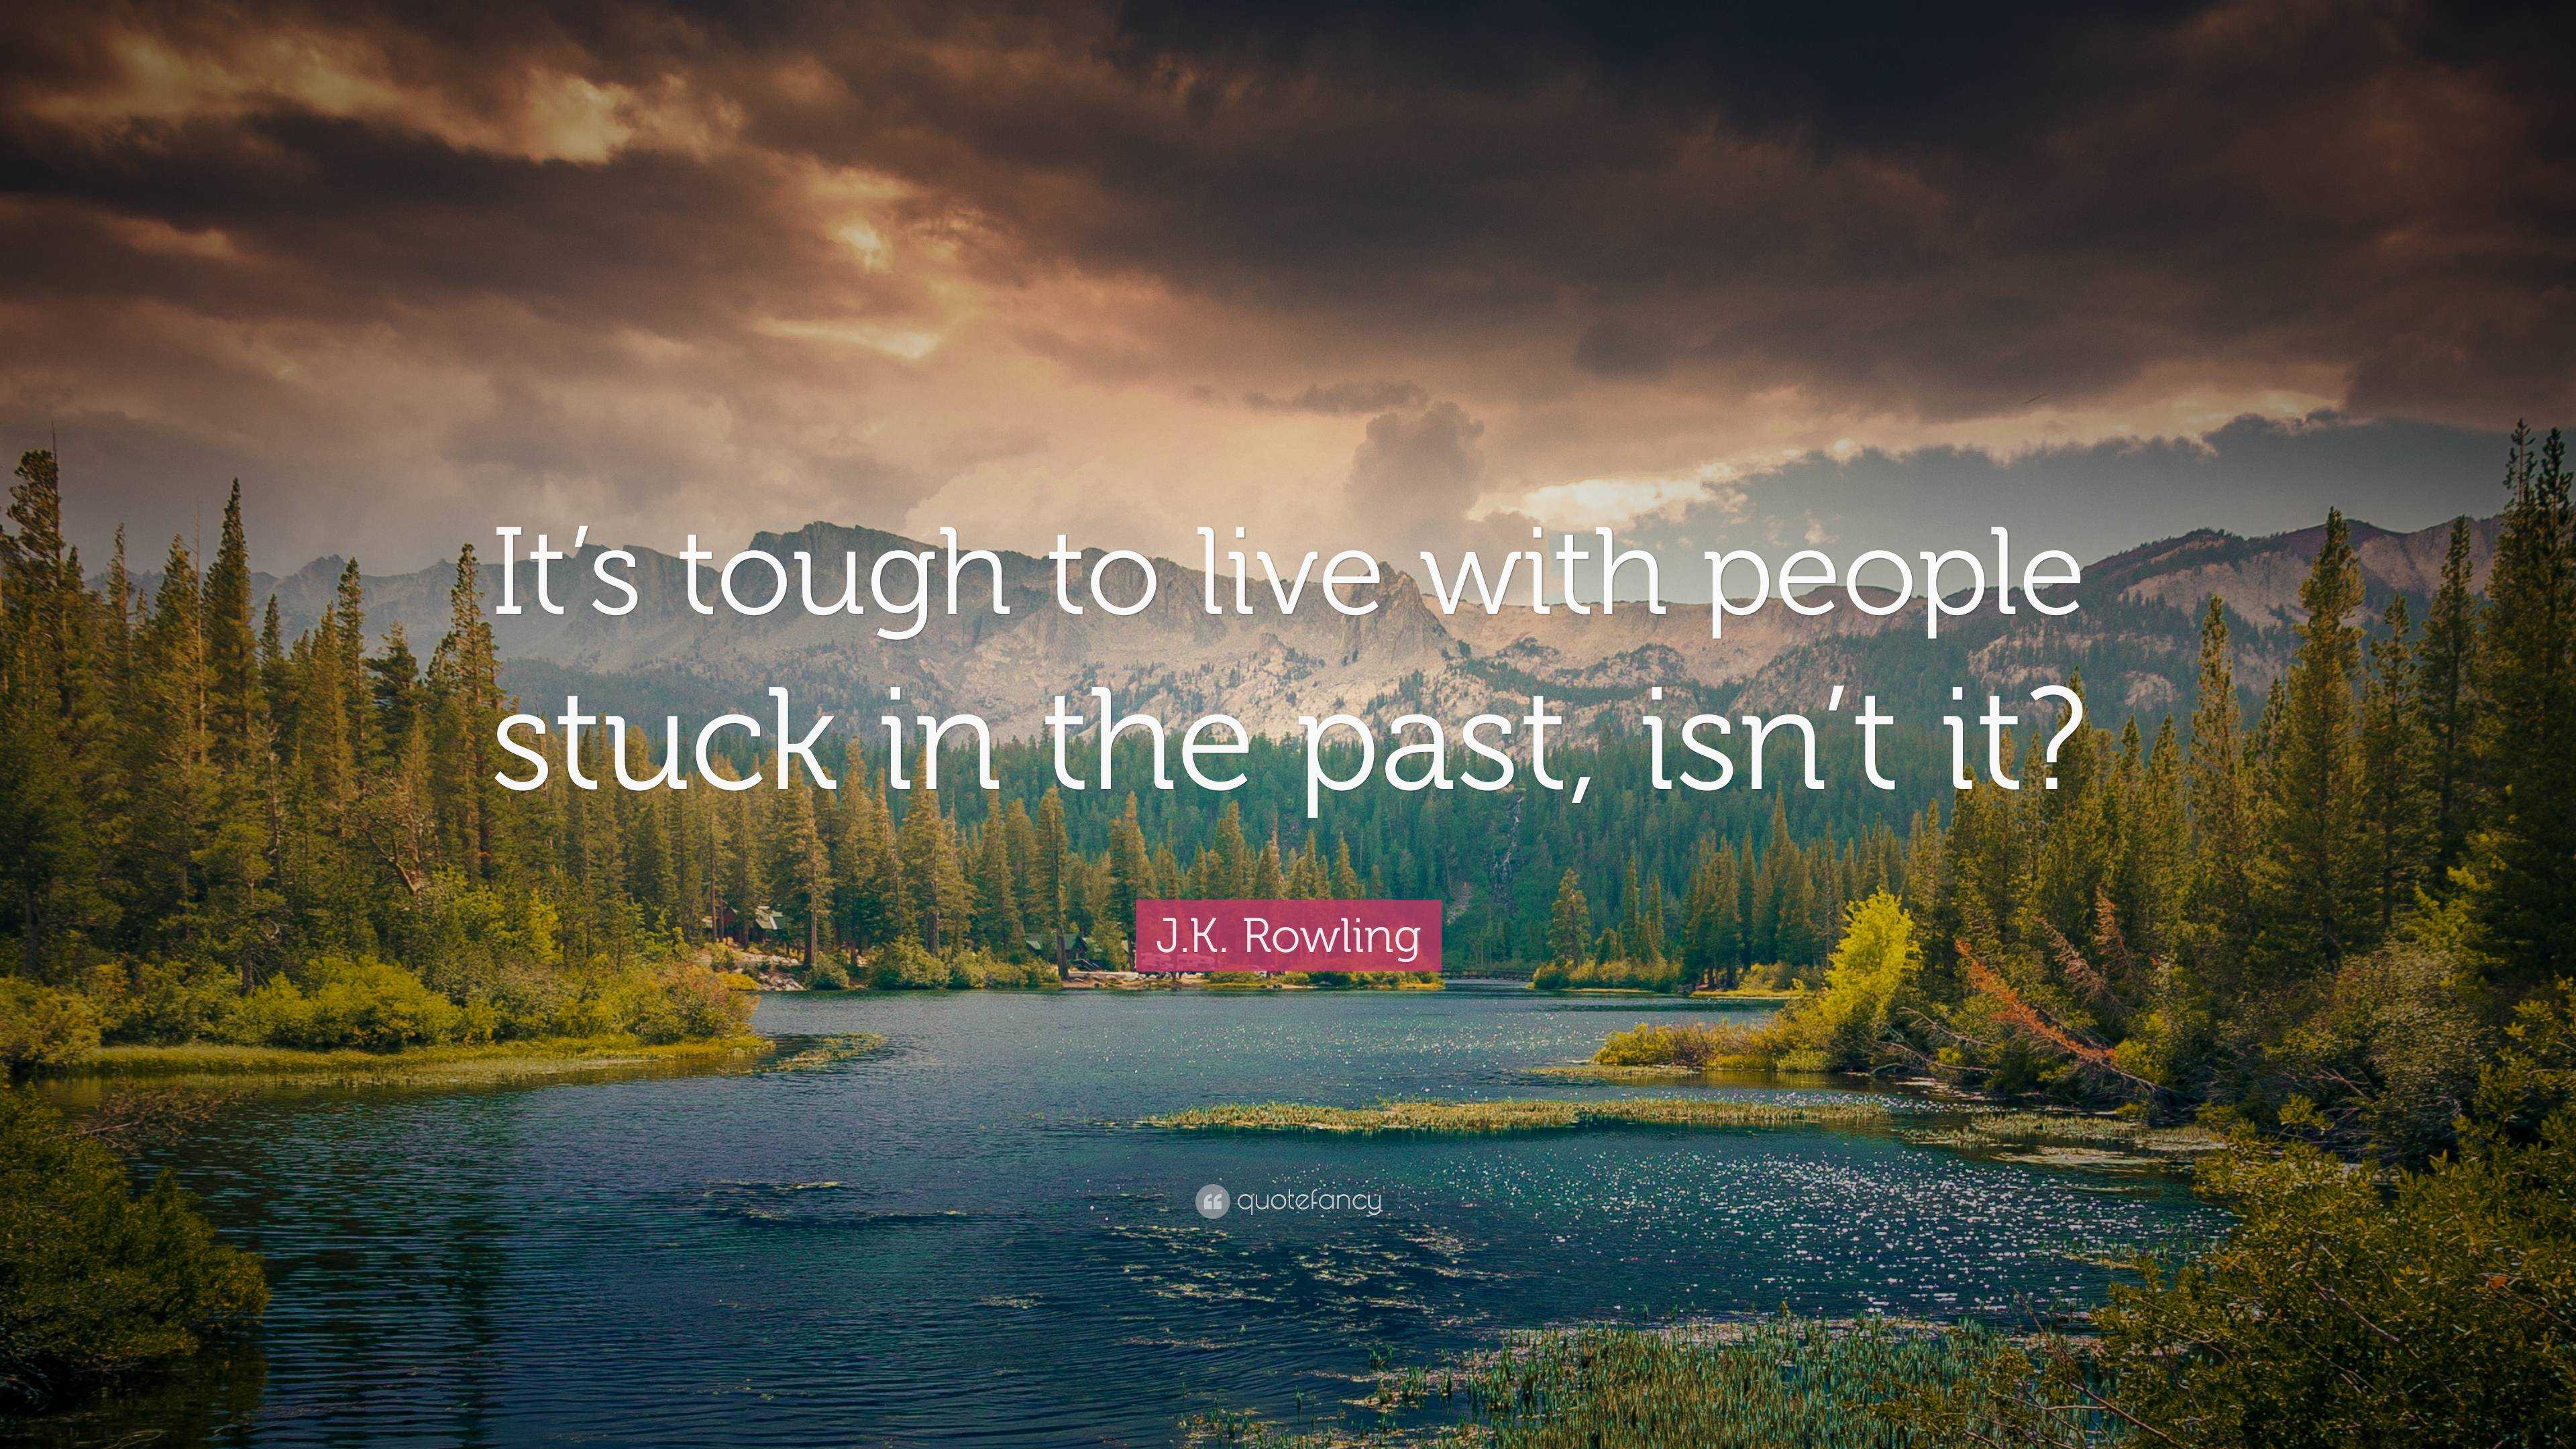 J.K. Rowling Quote “It’s tough to live with people stuck in the past